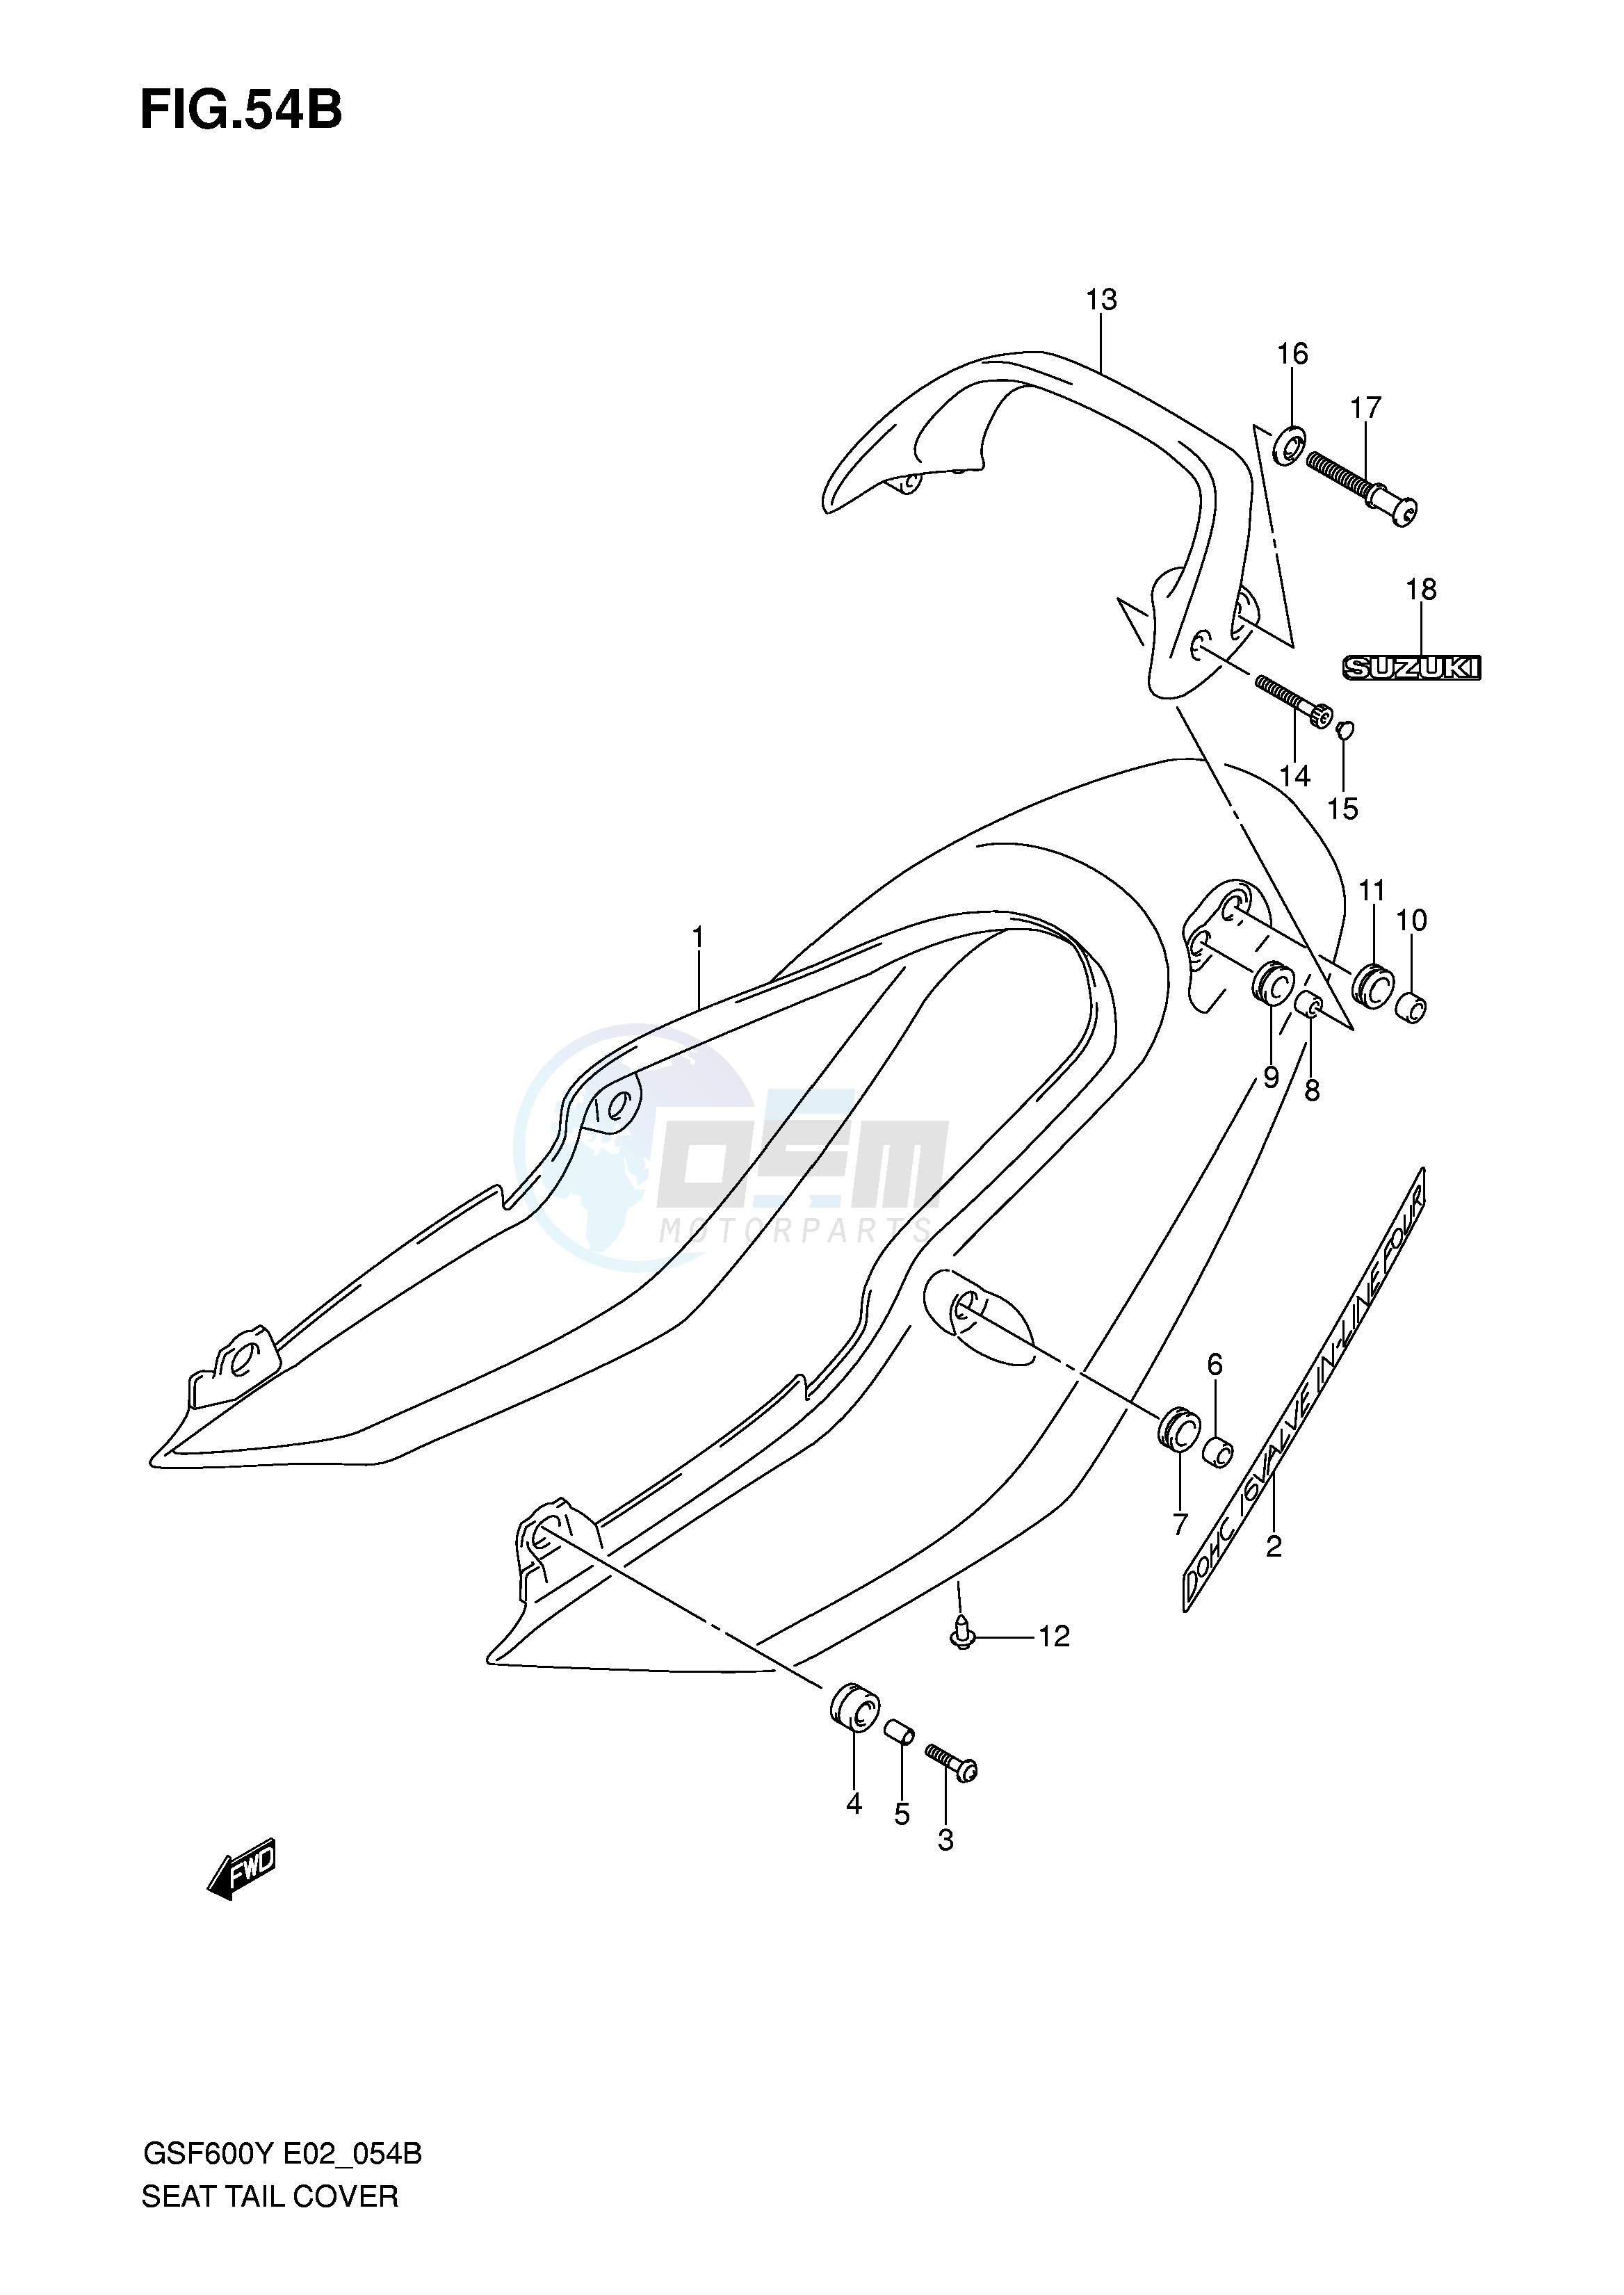 SEAT TAIL COVER (GSF600SK1 SUK1) blueprint